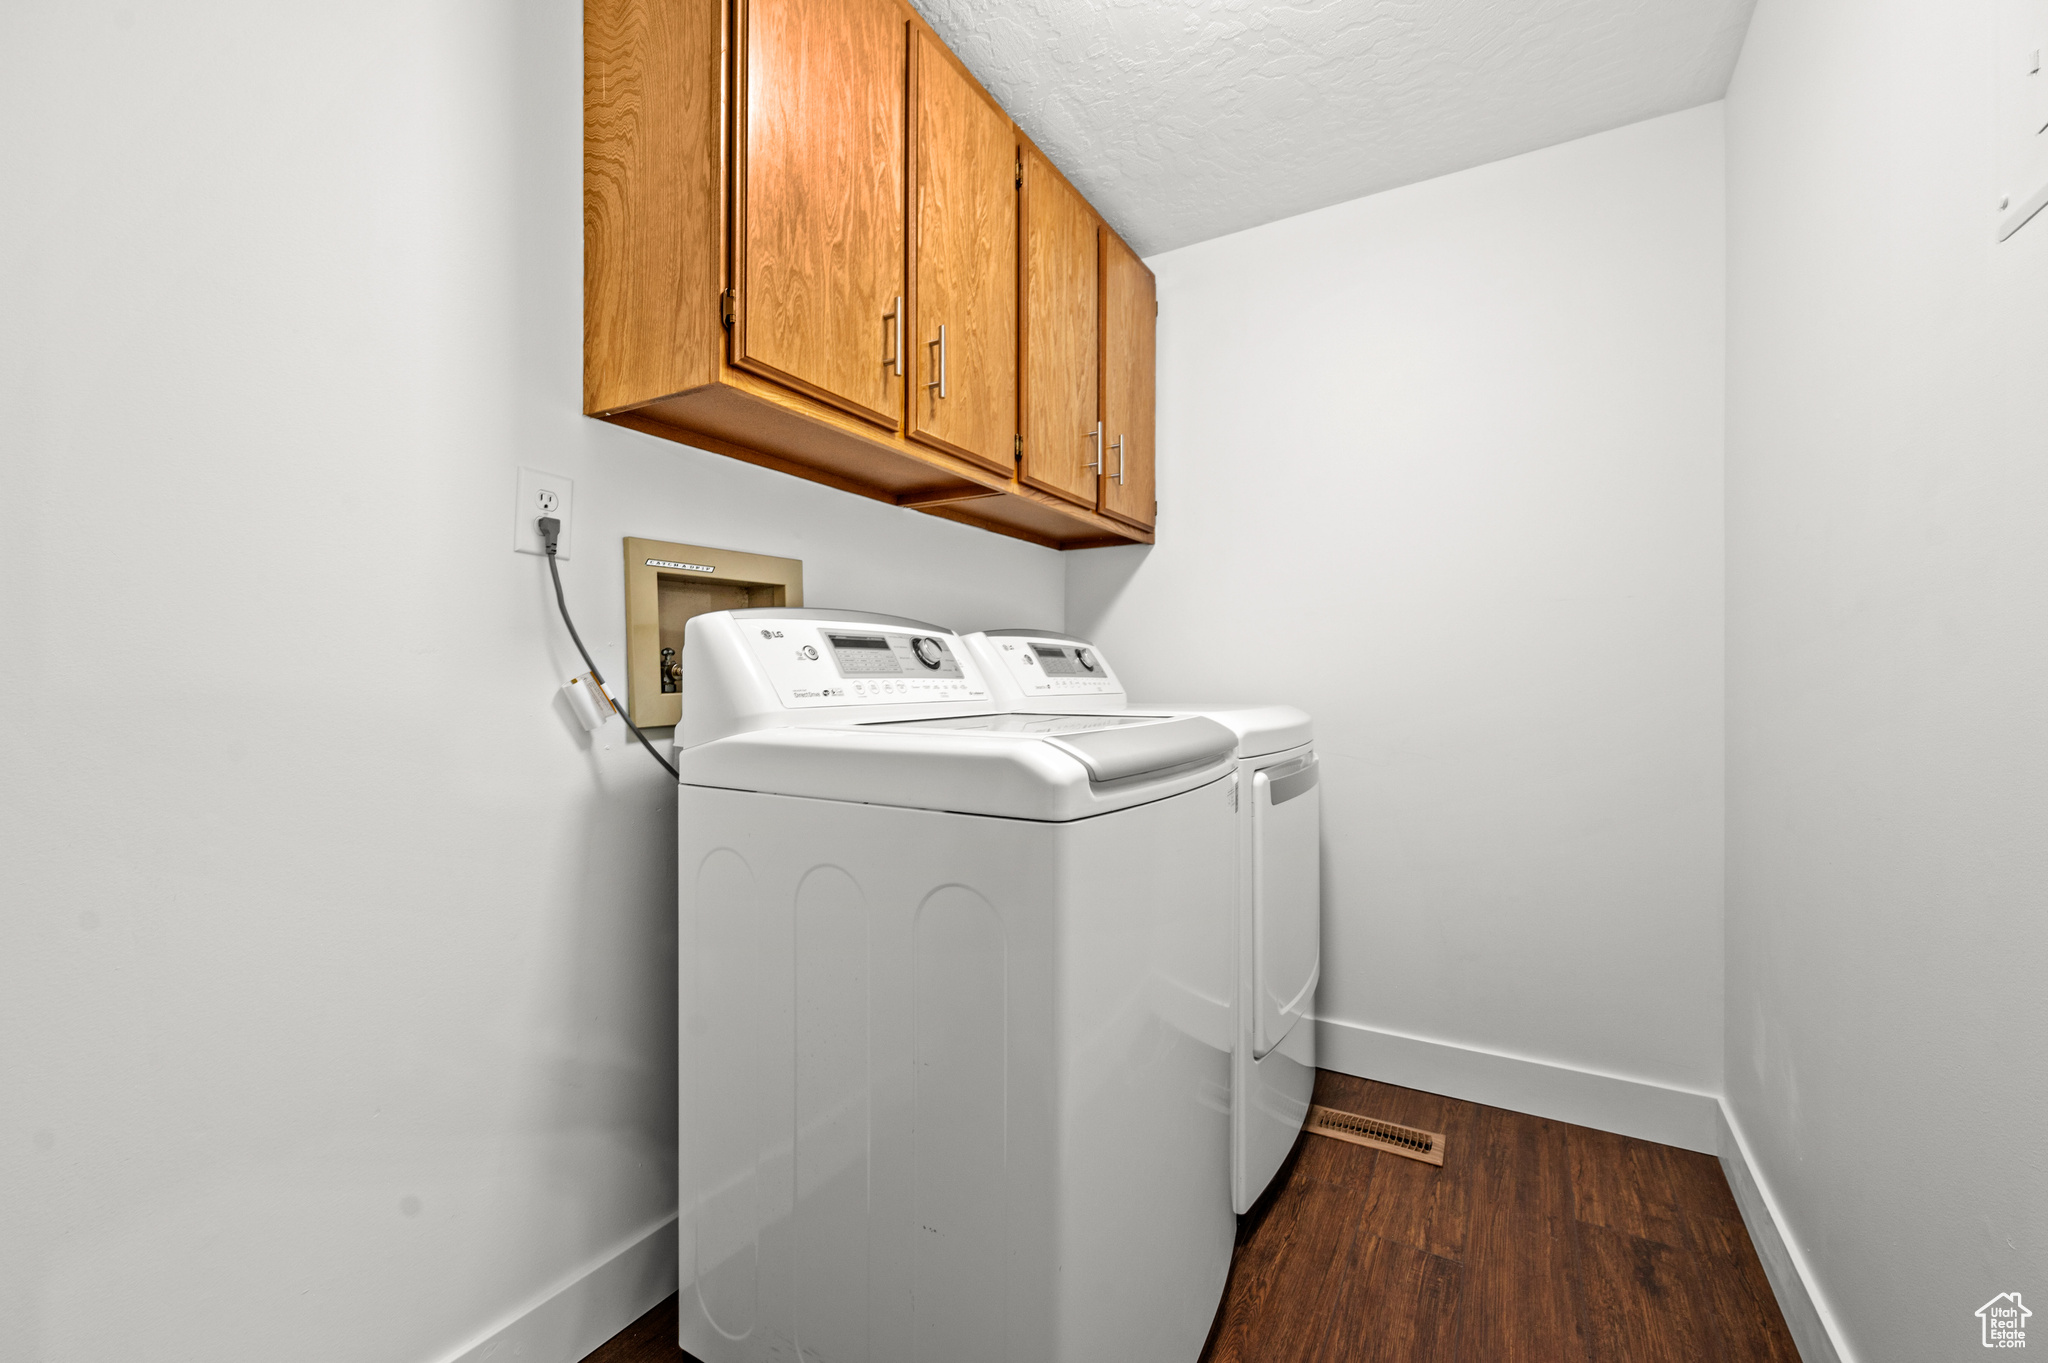 Laundry area with washer and dryer, washer hookup, dark wood-type flooring, and cabinets